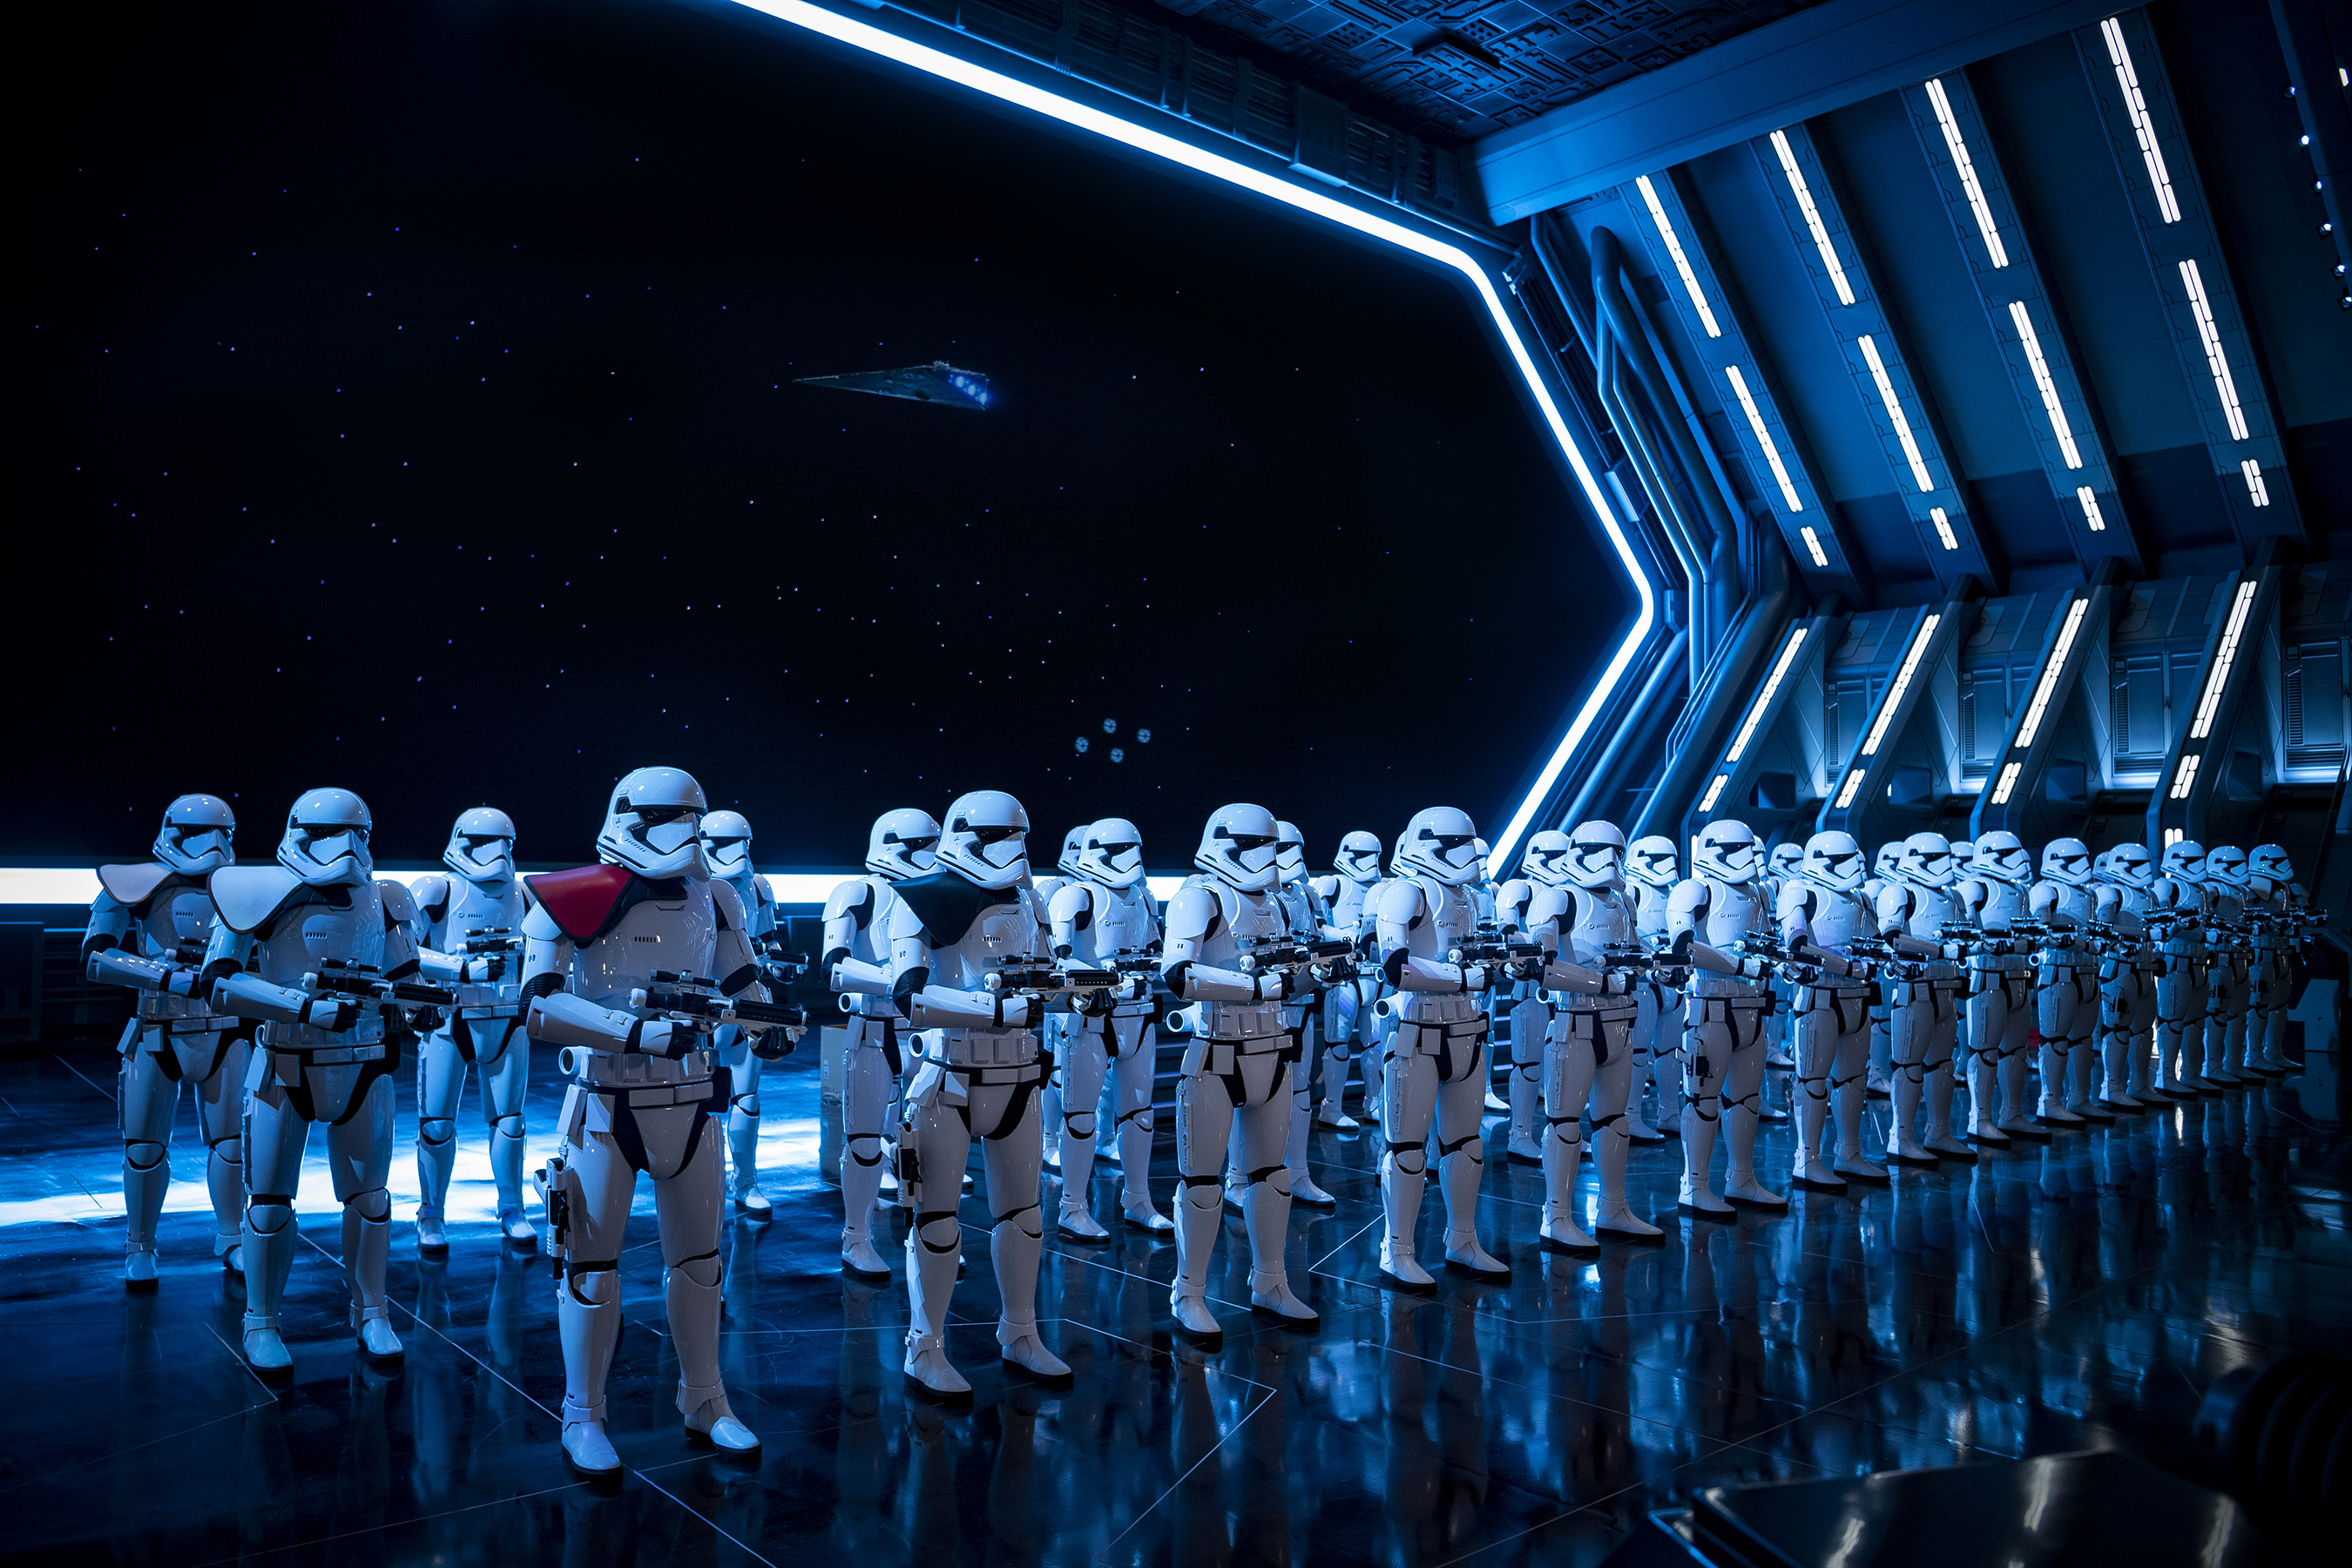 Star Wars: Rise of the Resistance Stormtroopers